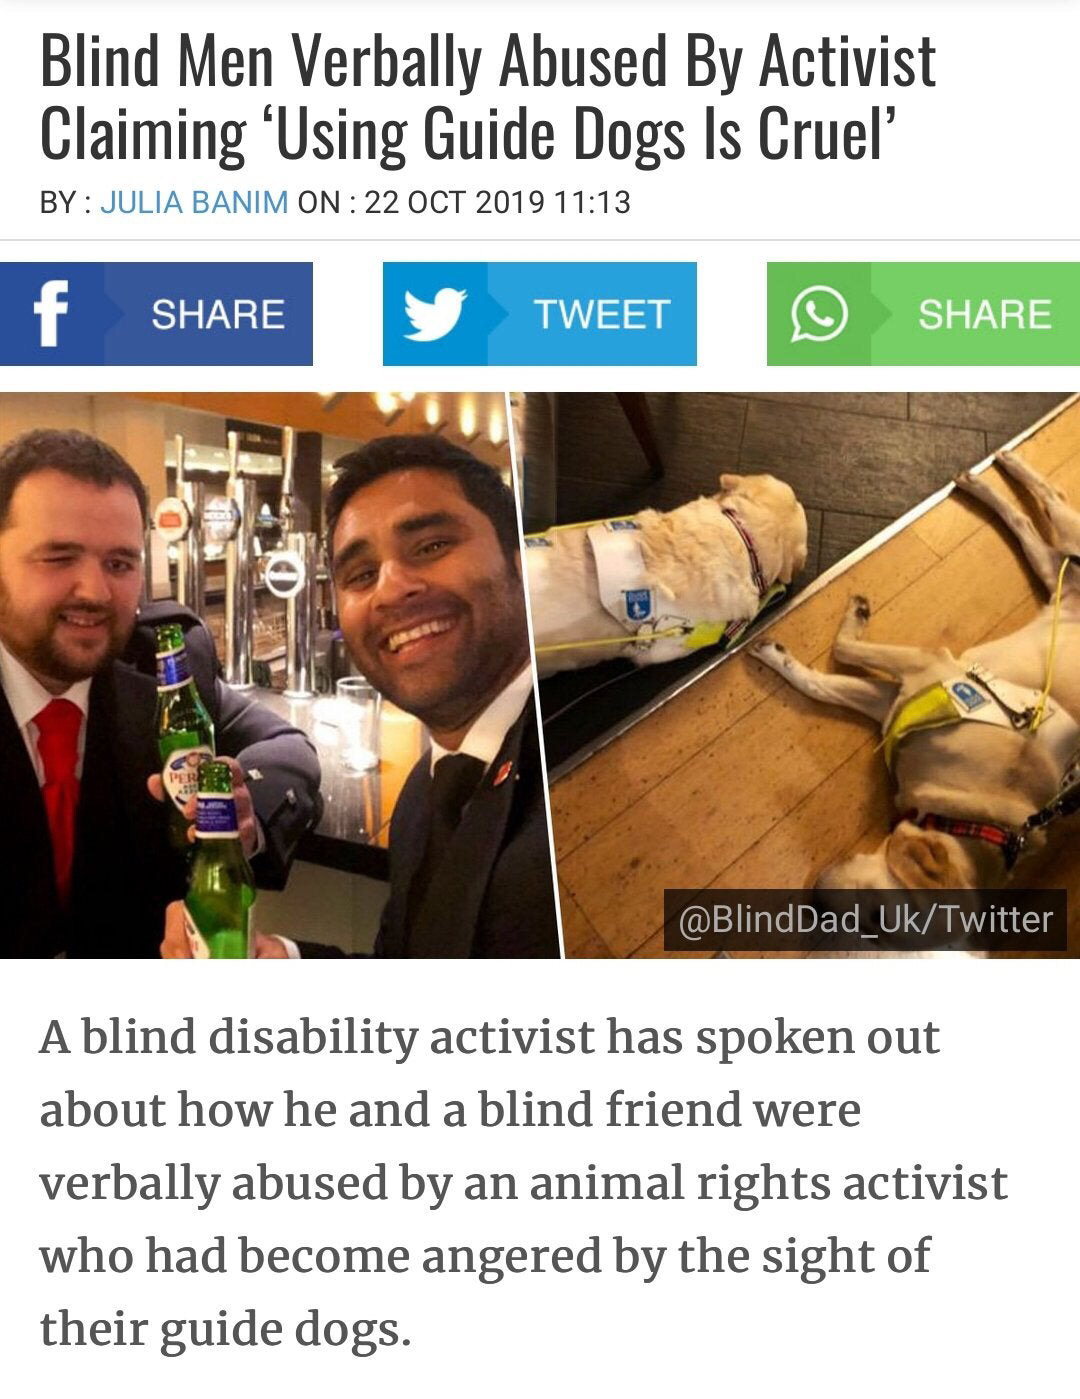 photo caption - Blind Men Verbally Abused By Activist Claiming 'Using Guide Dogs Is Cruel By Julia Banim On f Tweet Dad_UkTwitter A blind disability activist has spoken out about how he and a blind friend were verbally abused by an animal rights activist 